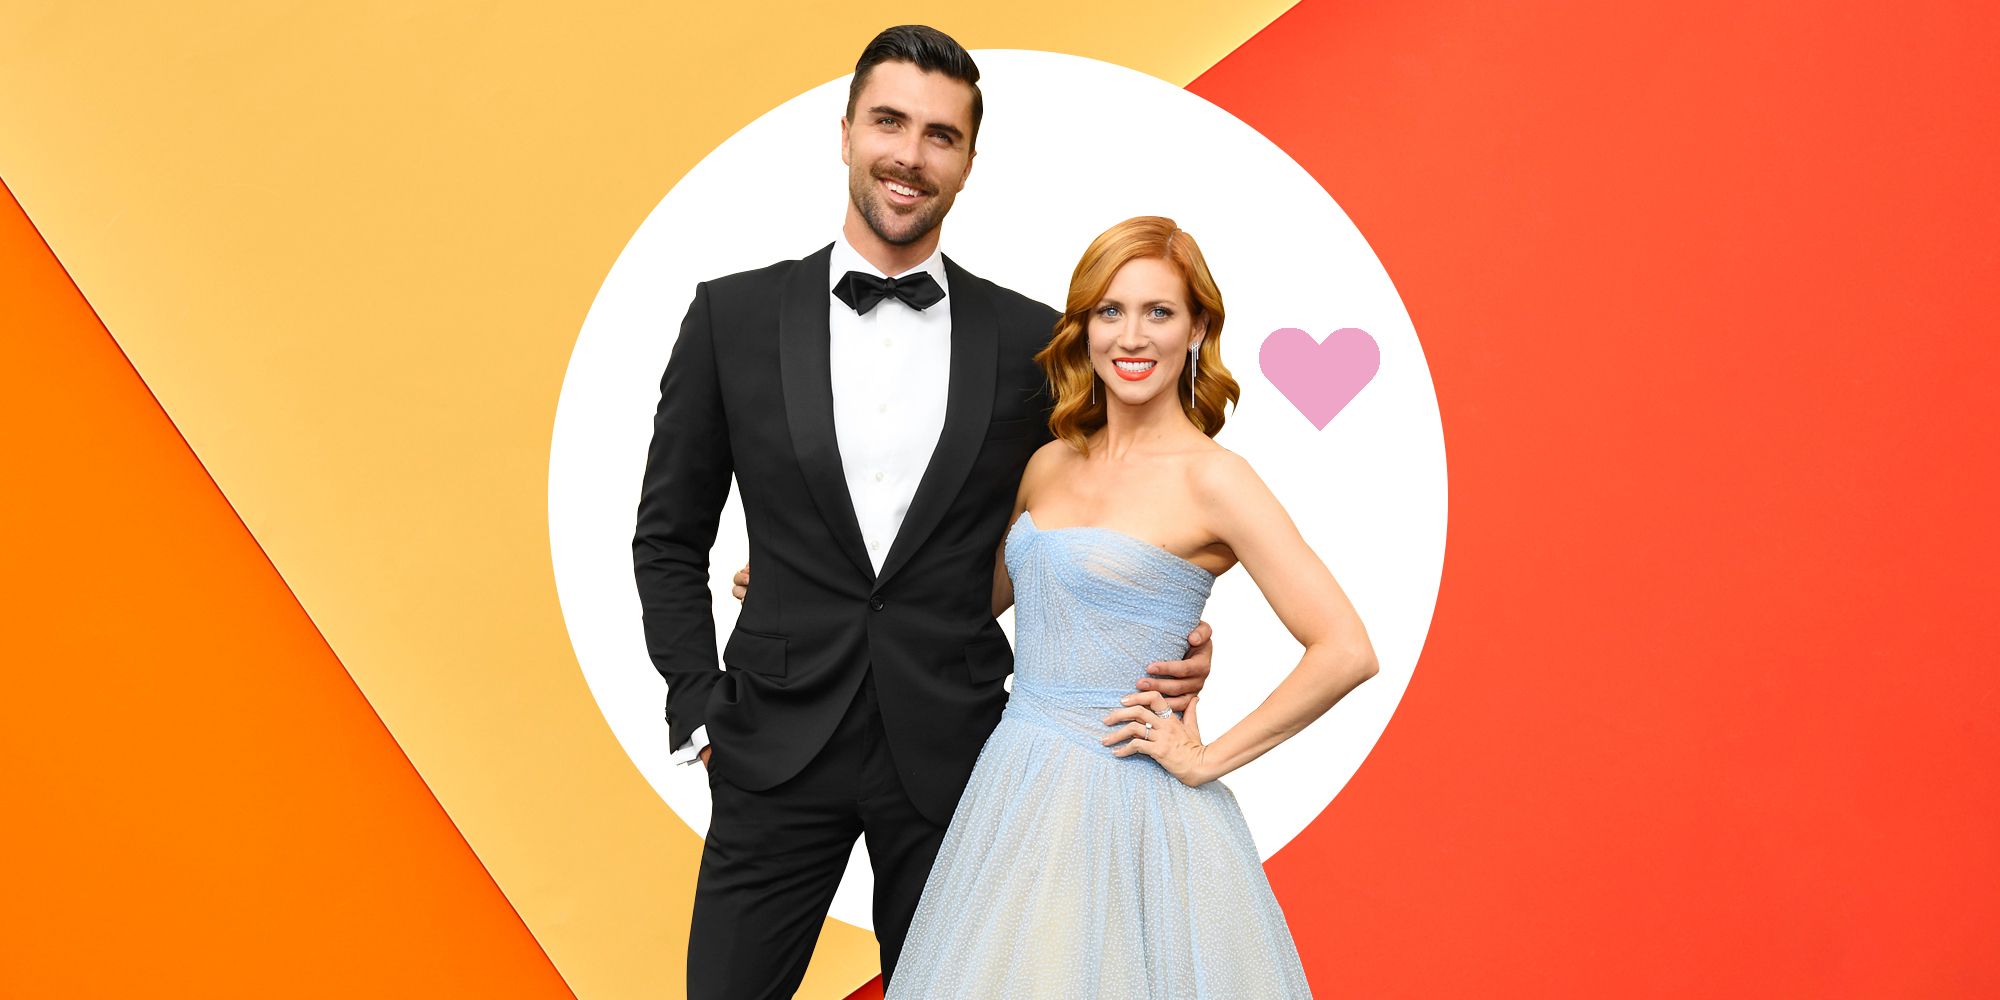 Brittany Snow and Husband Tyler Stanalands Body Language, Explained